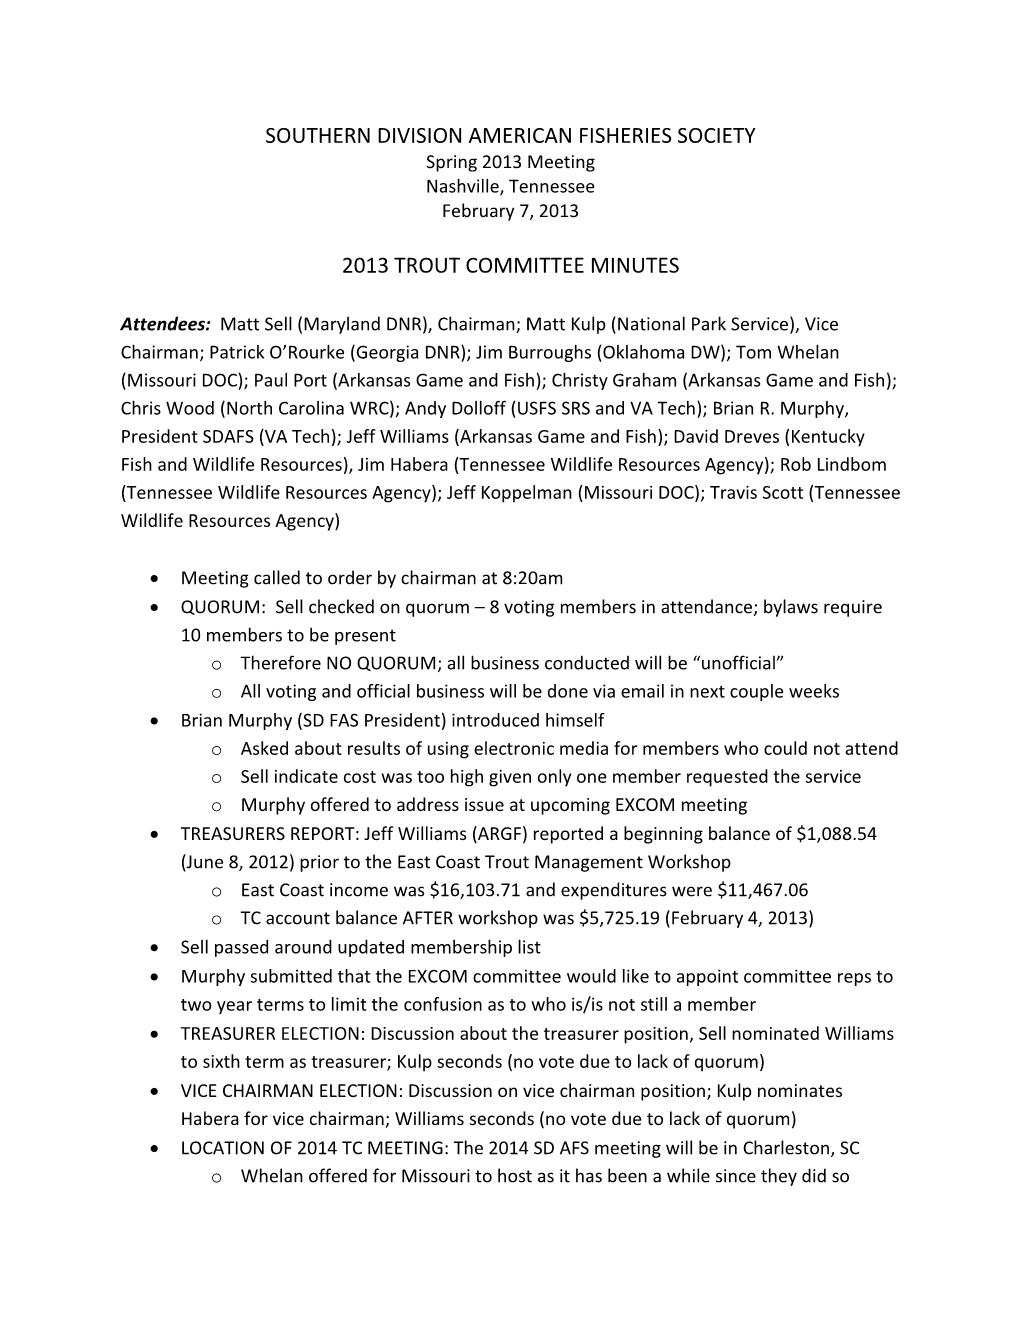 Southern Division American Fisheries Society 2013 Trout Committee Minutes